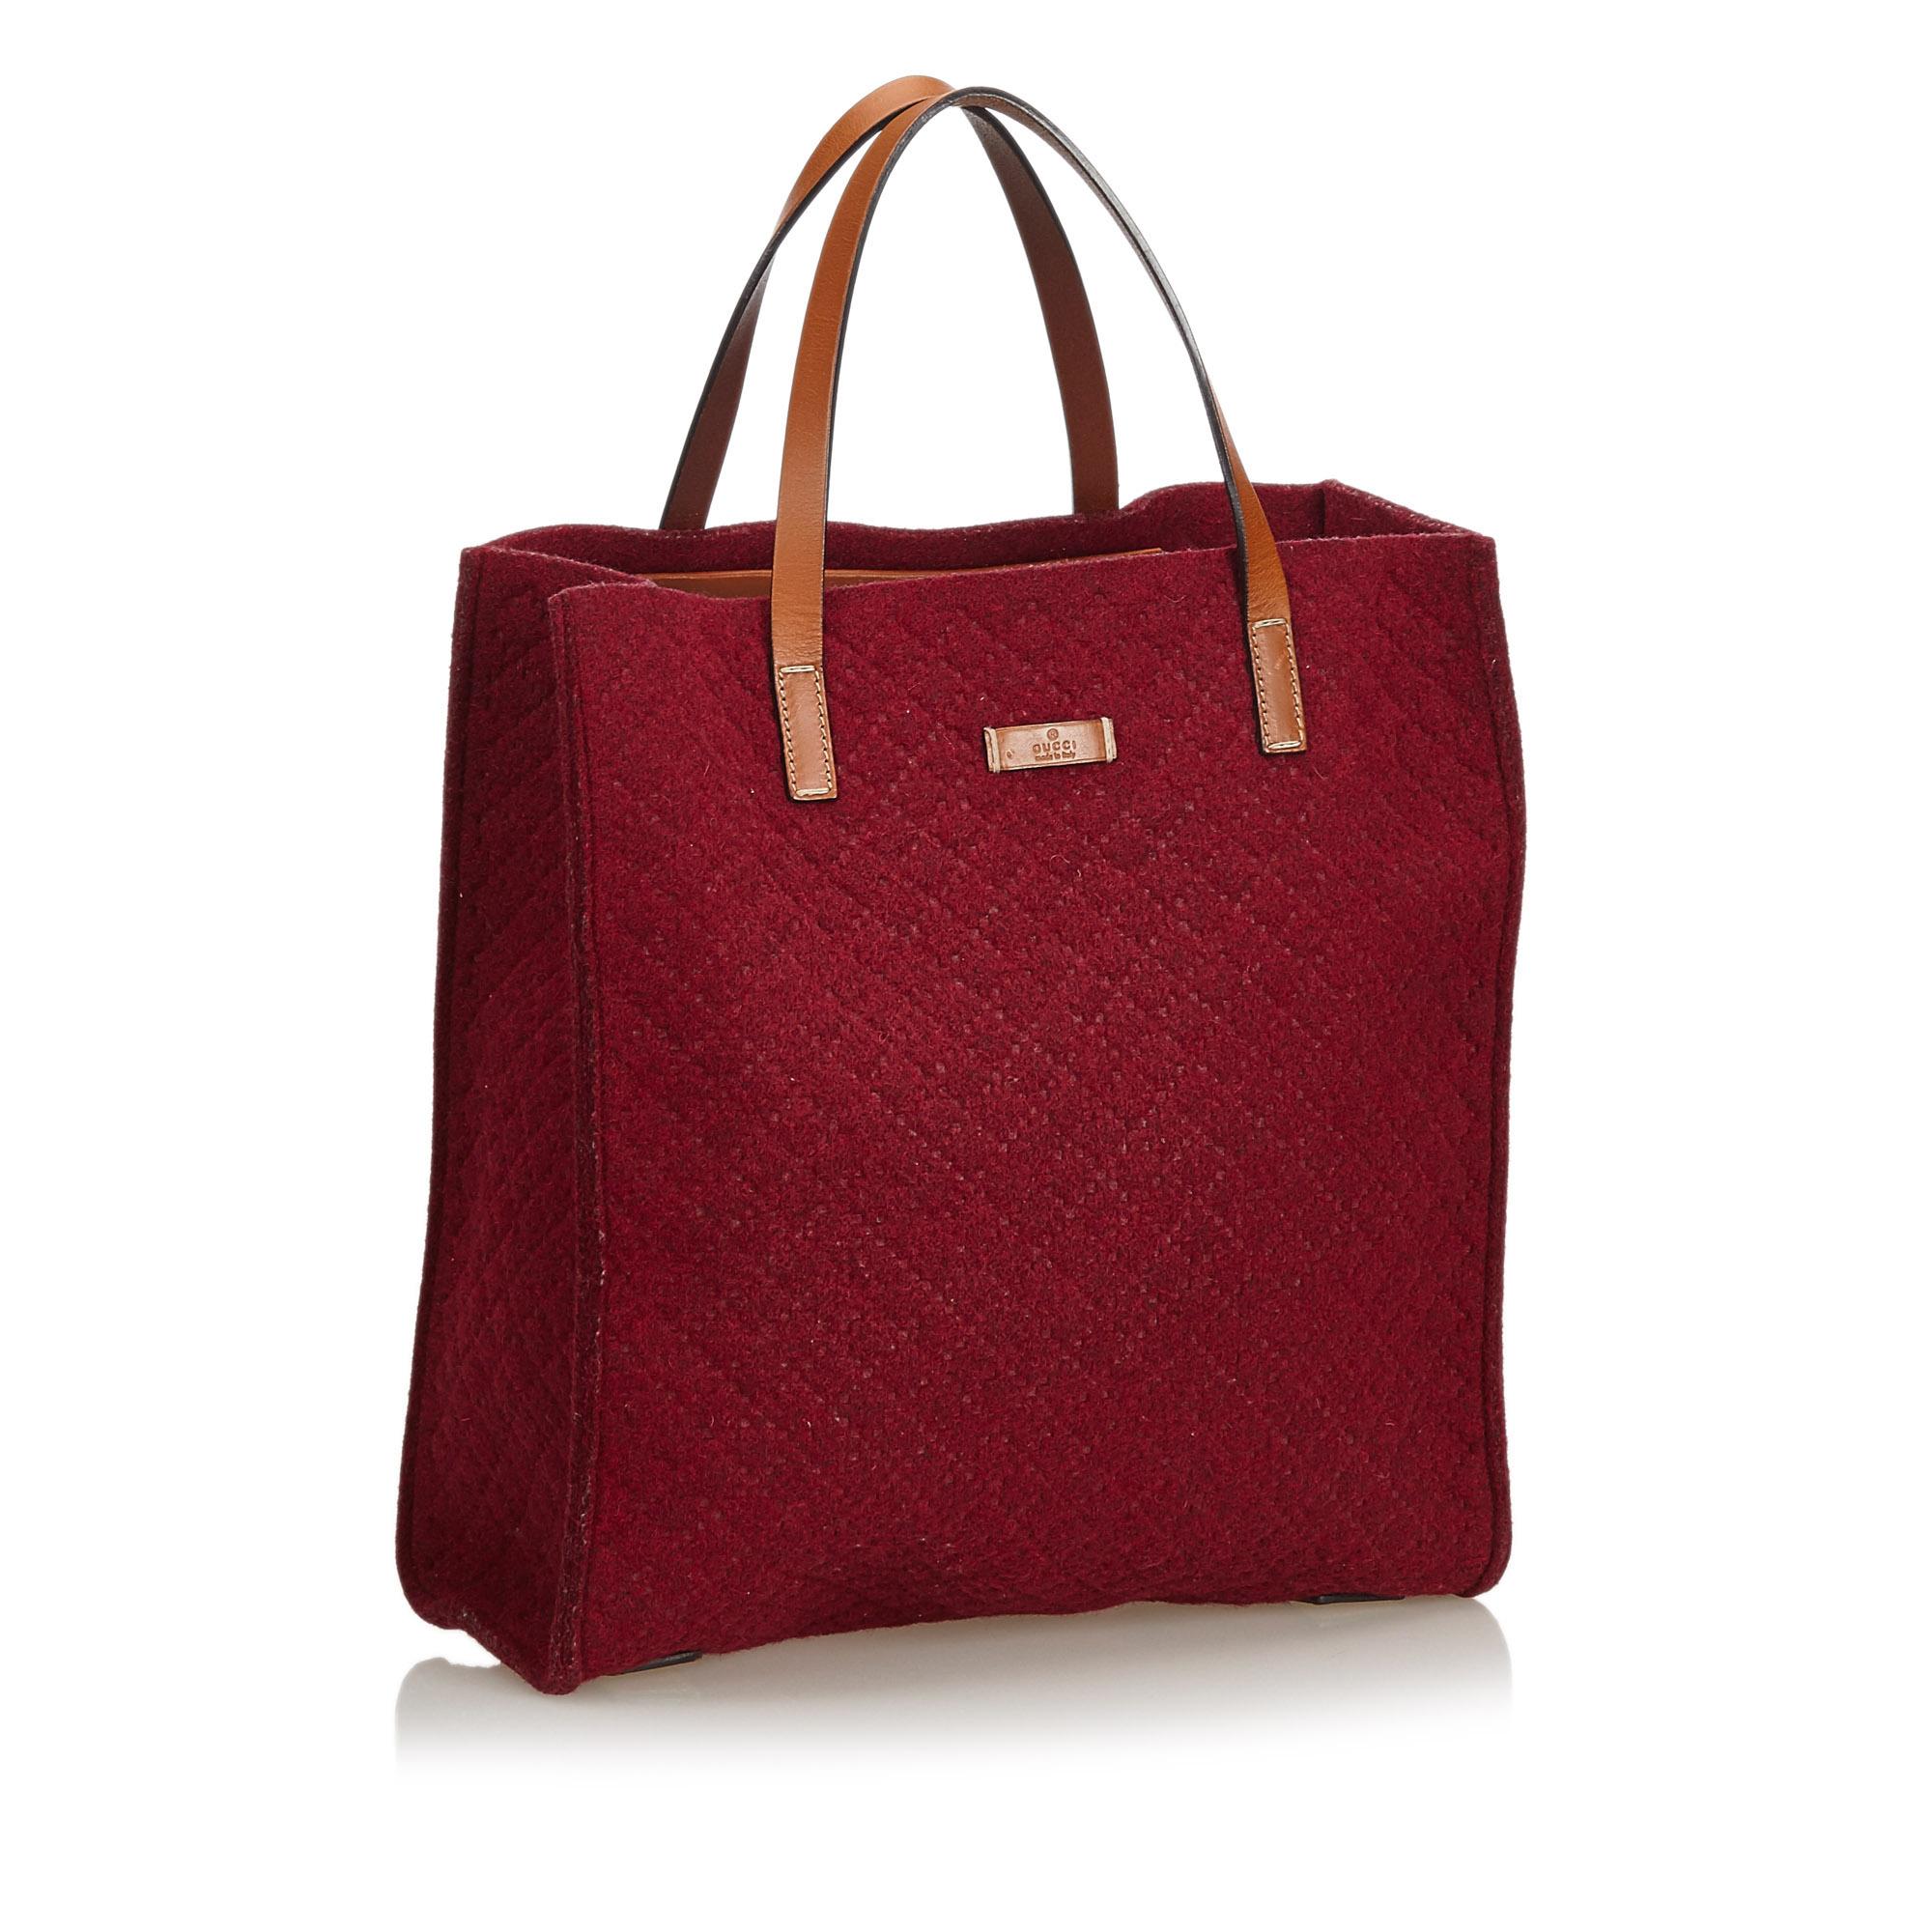 This tote bag features a felt body, flat leather handles, and an open top. It carries as AB condition rating.

Inclusions: 
This item does not come with inclusions.

Dimensions:
Length: 33.00 cm
Width: 31.50 cm
Depth: 12.00 cm
Hand Drop: 14.00